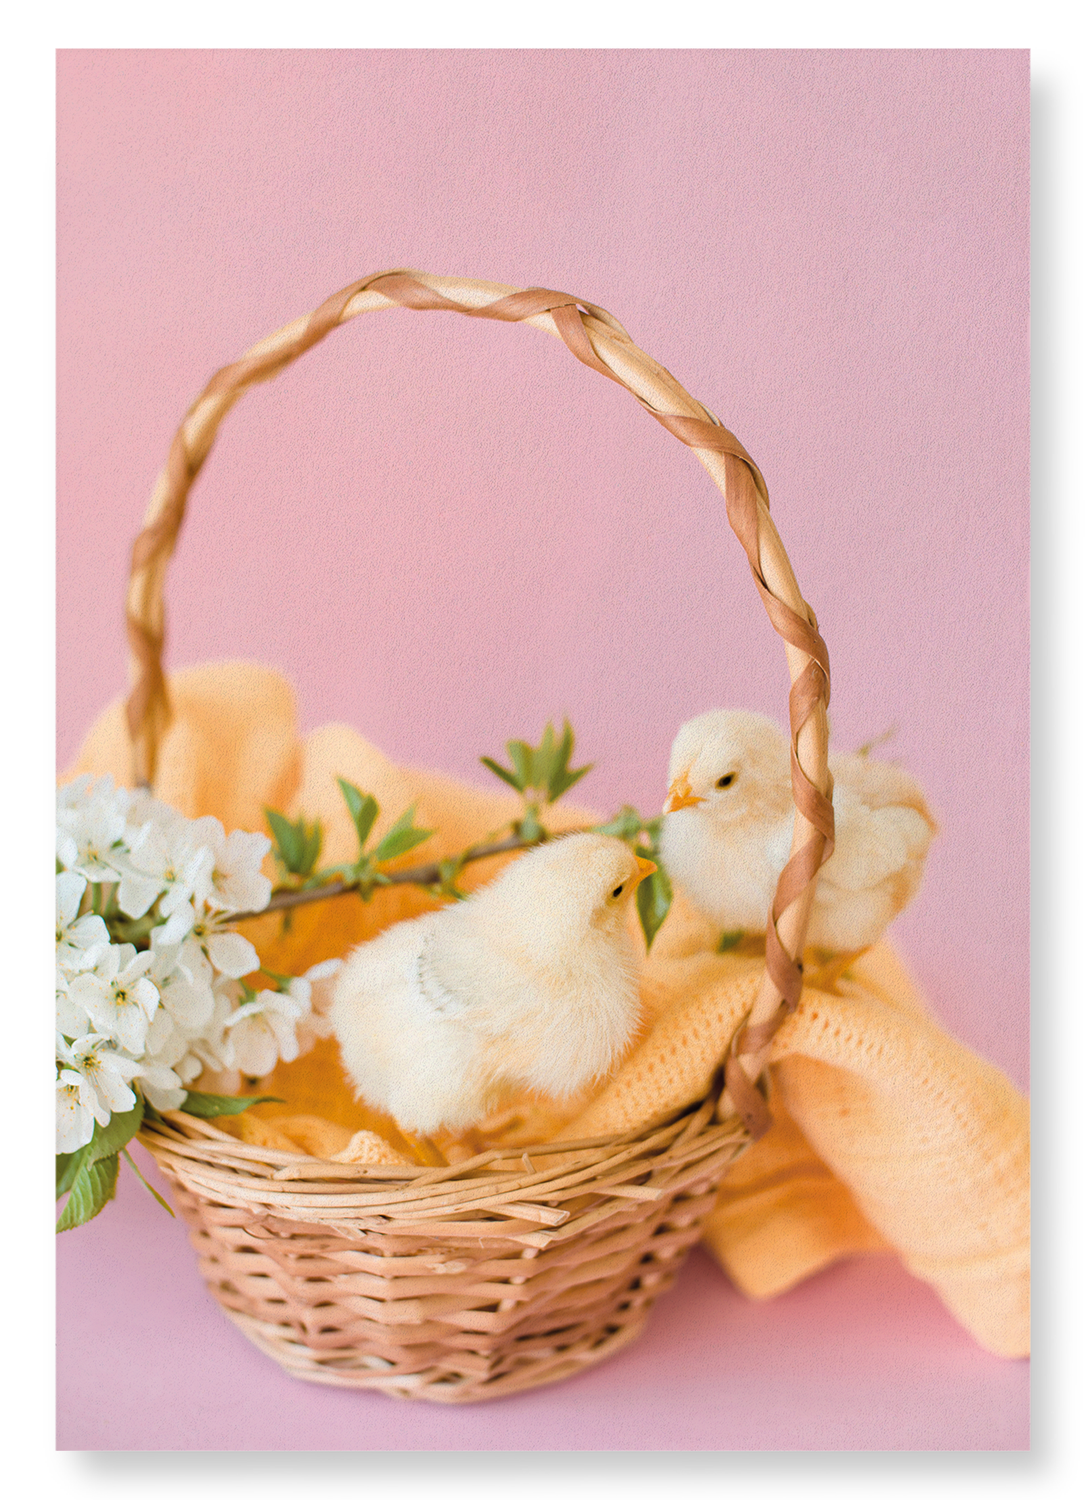 TWO CHICKS AND BASKET